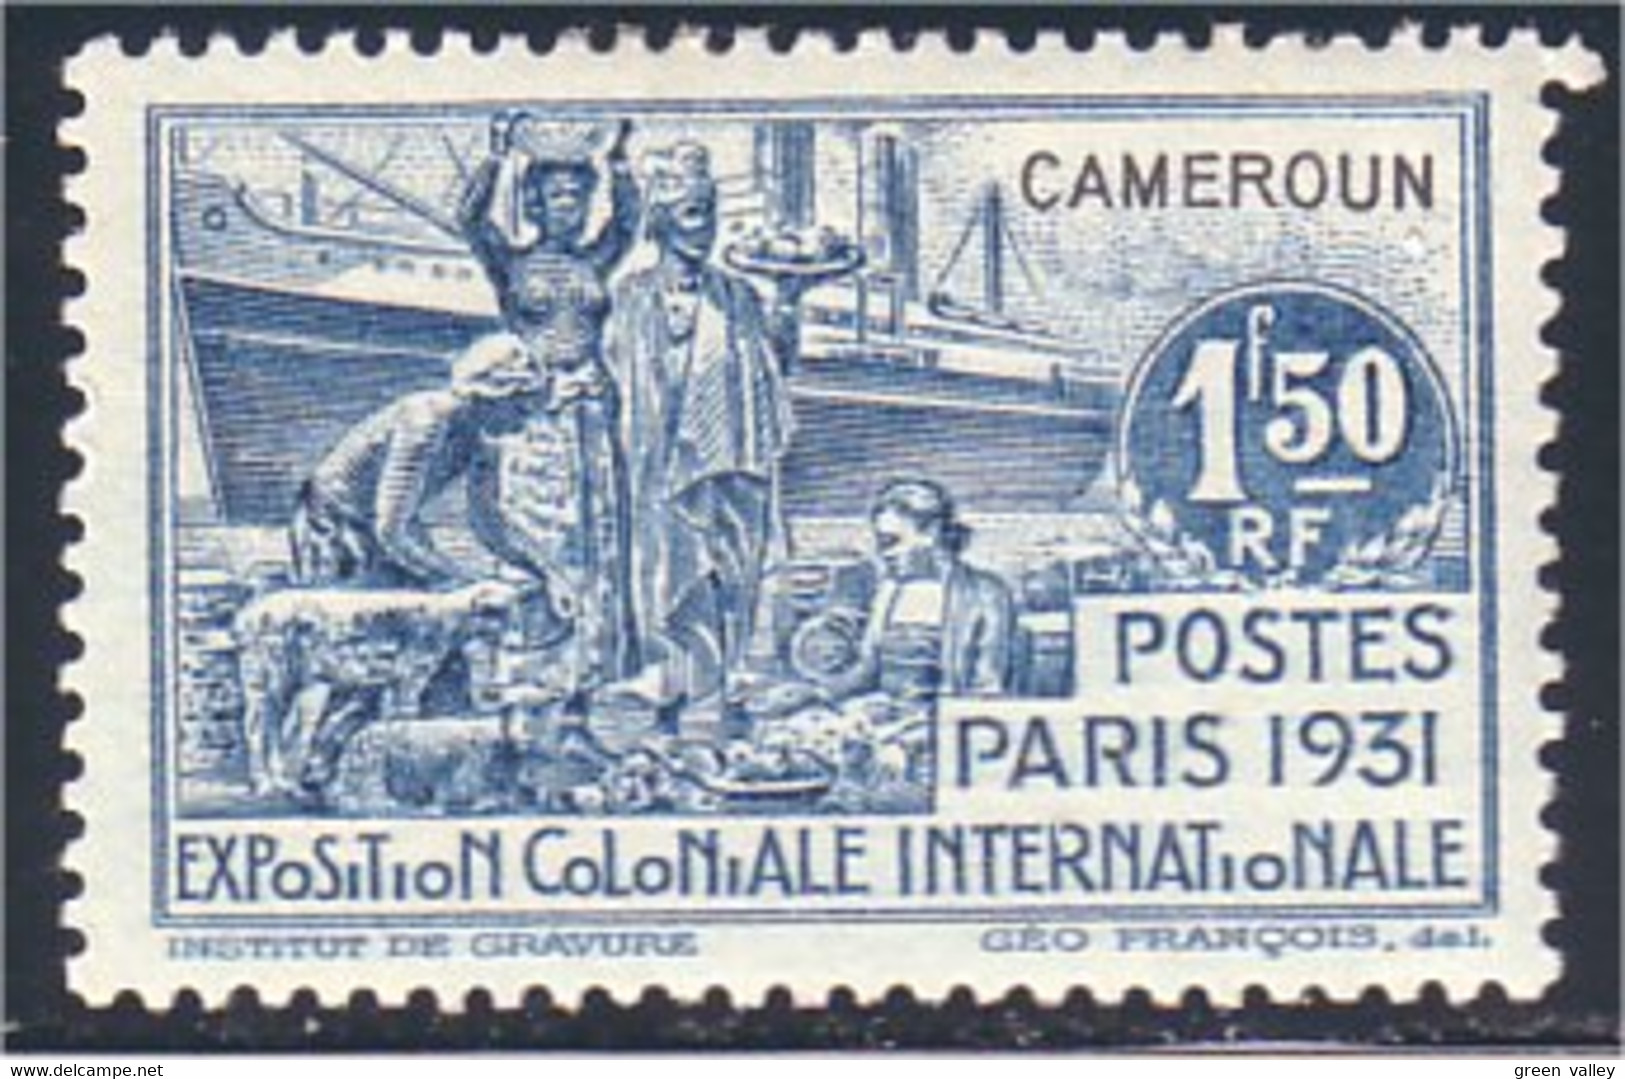 236 Cameroun 1f50 Expo Coloniale 1931 MH * Neuf CH (CAM-2) - Unused Stamps